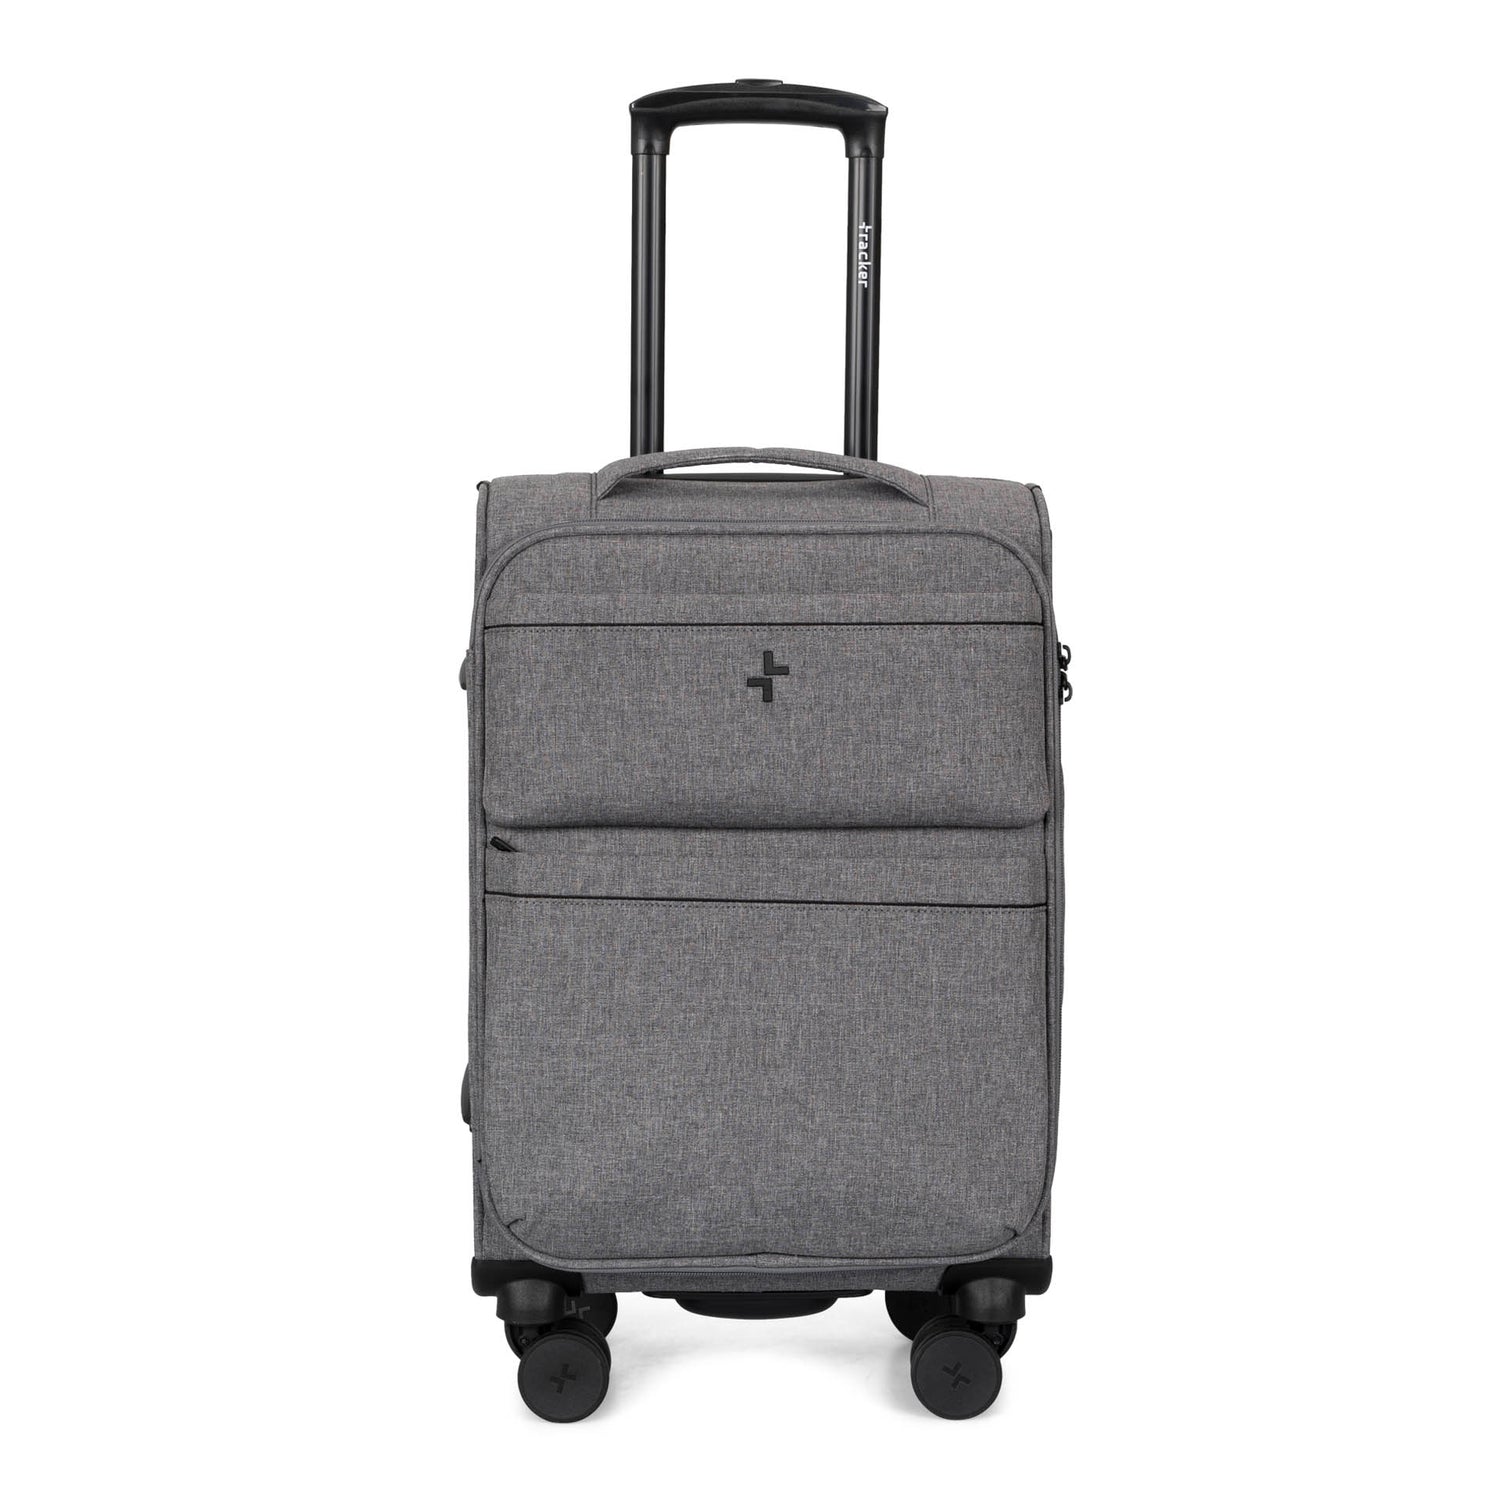 Expedition Softside 22" Carry-On Luggage